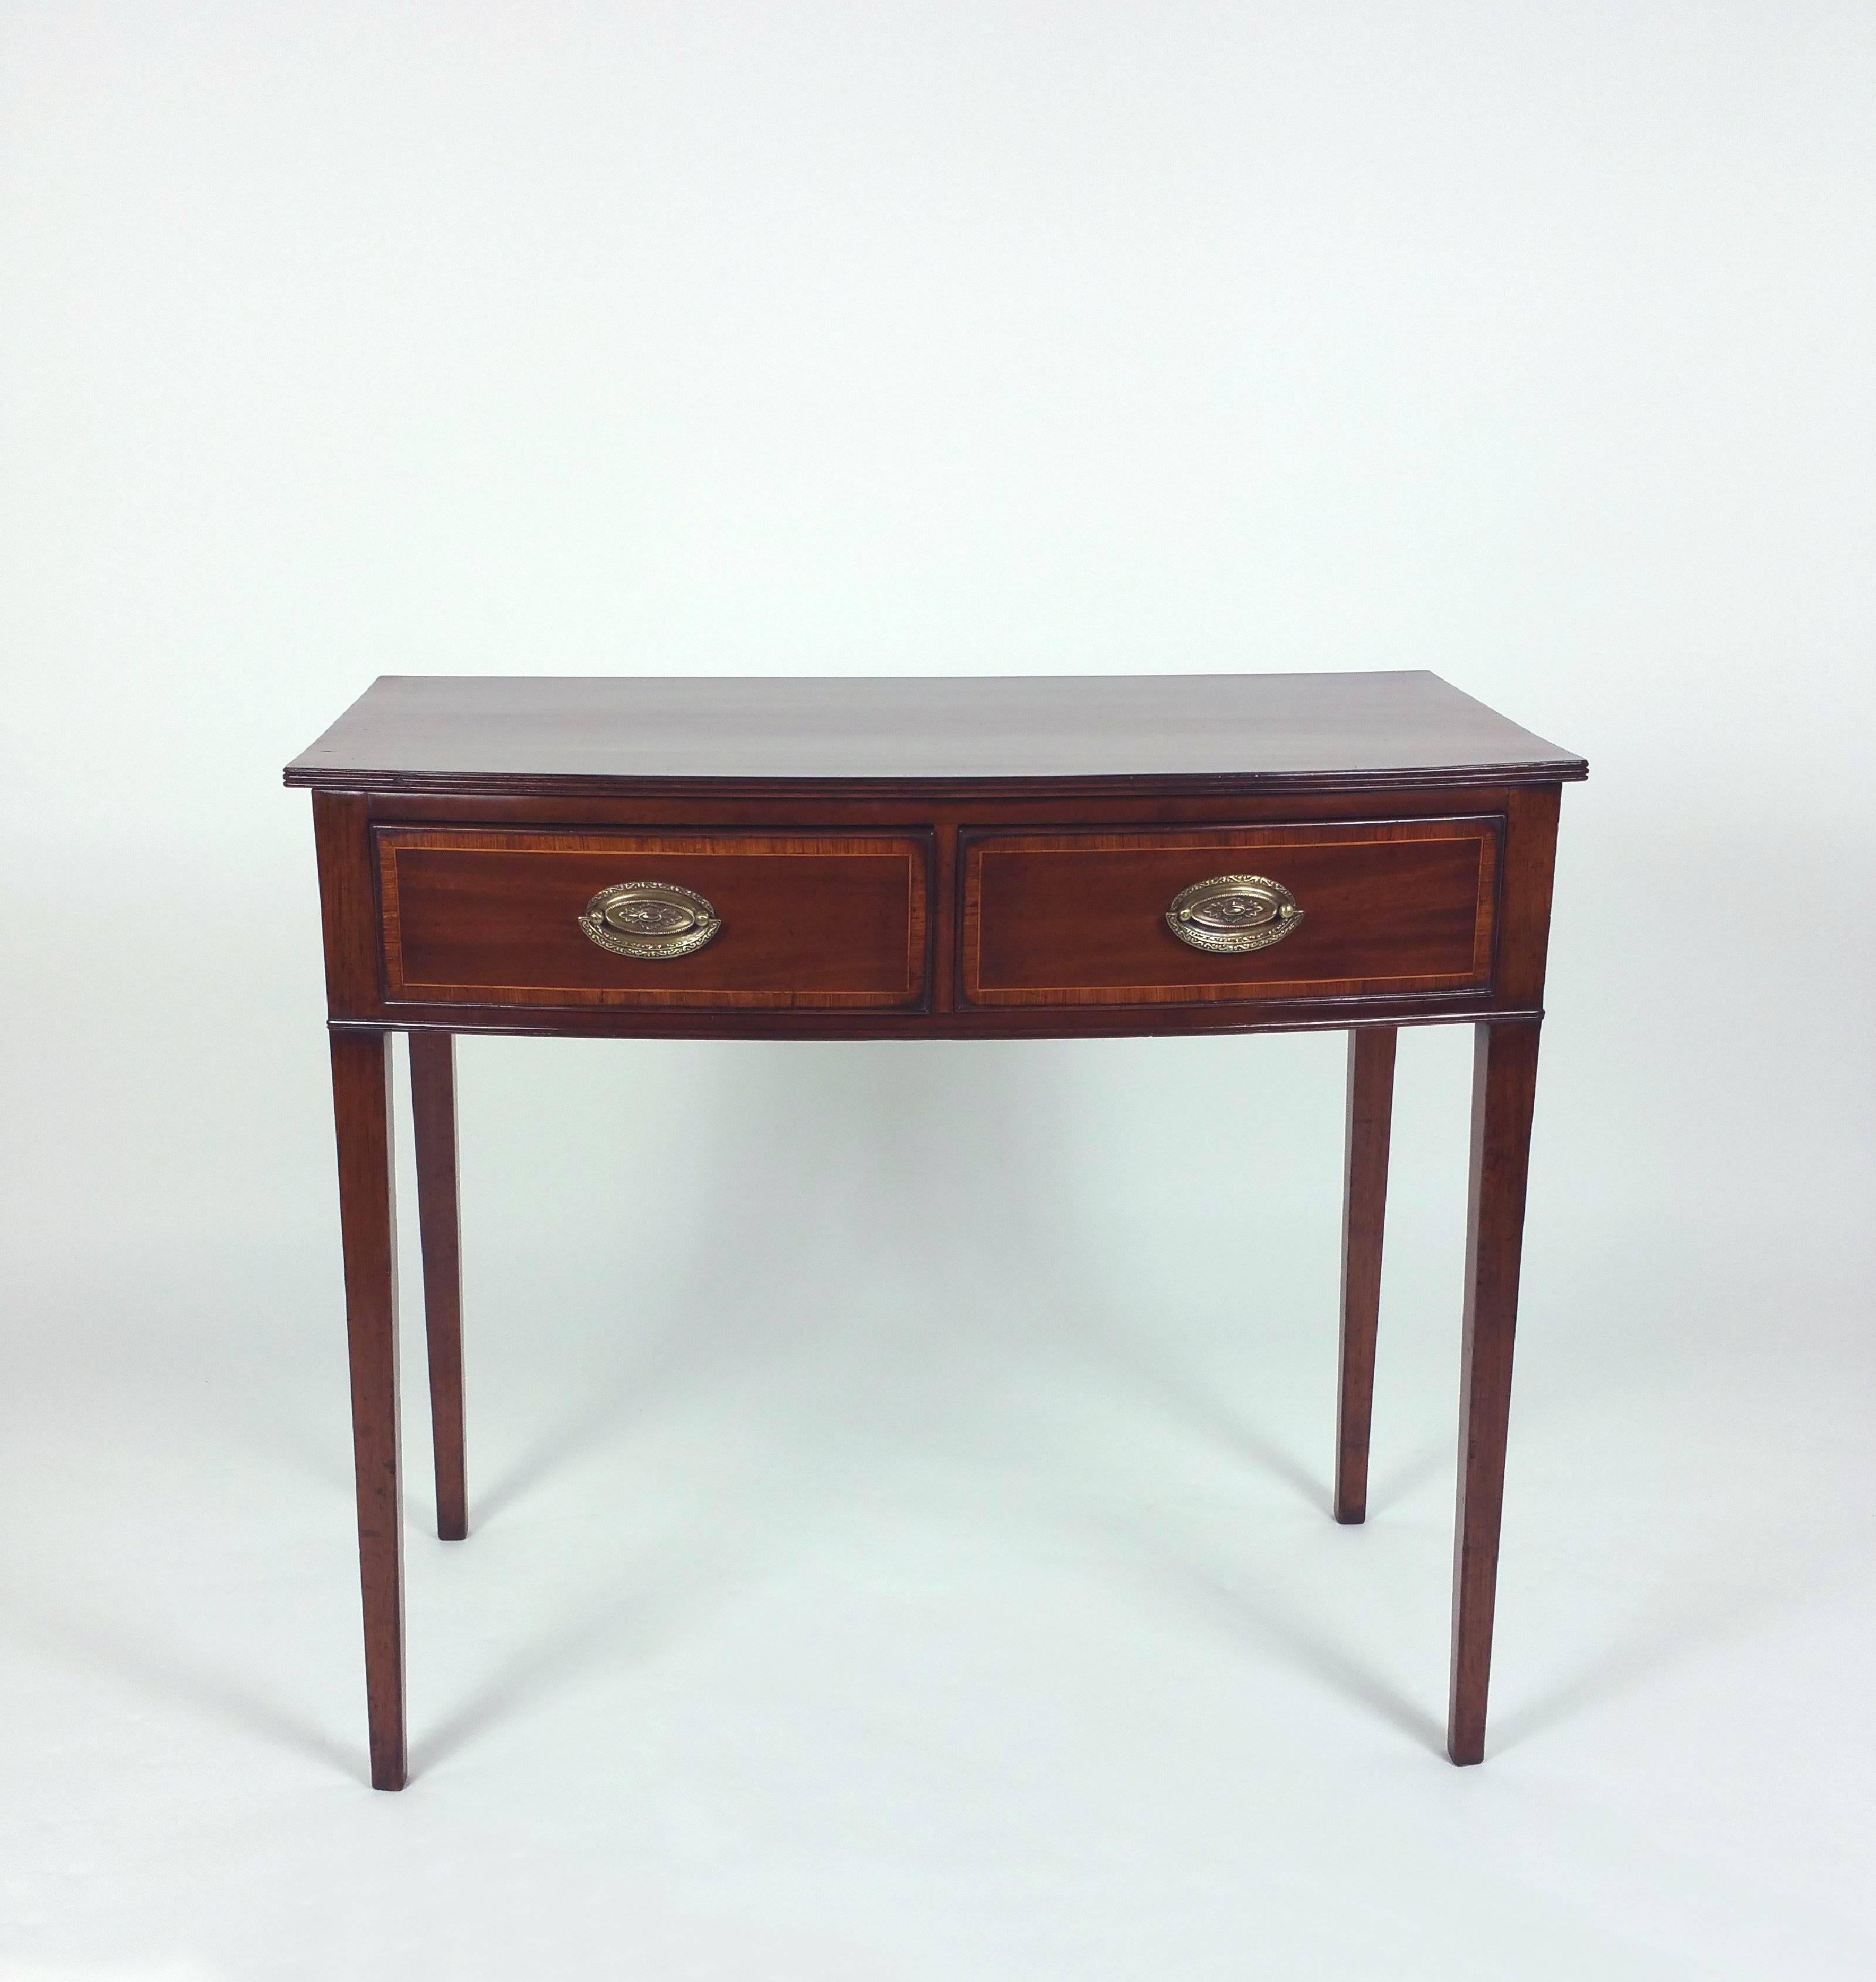 This superb George III mahogany bow fronted two-drawer side table features a rosewood crossbanded decoration around the top and the drawers. The table has decorative brass pull rings for both drawers and stands on square tapered legs. It measures 35